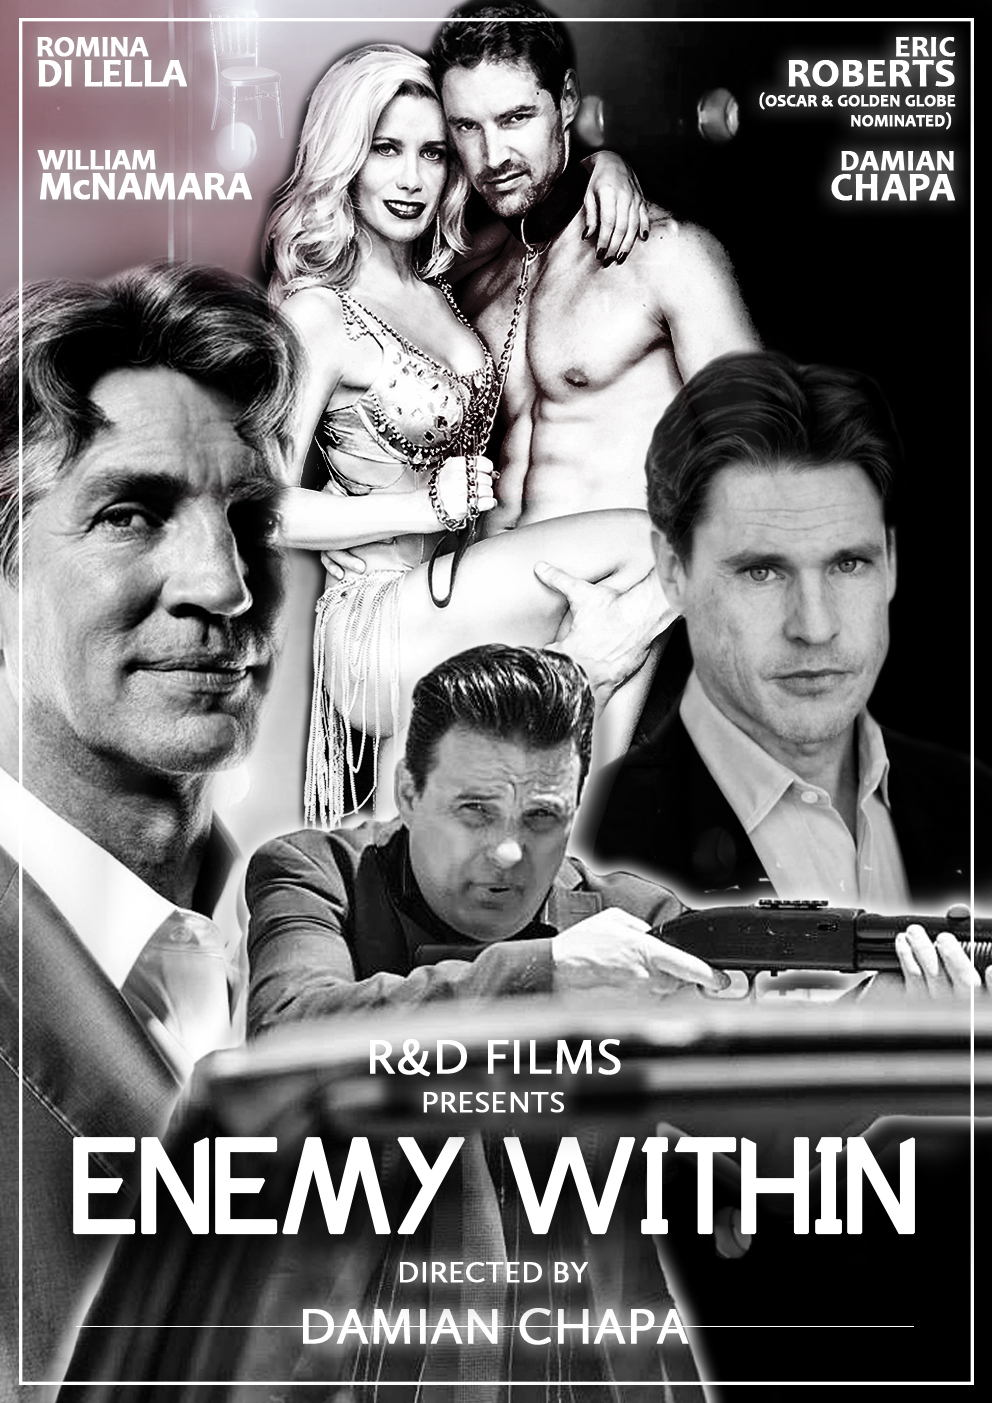 Movie: Enemy Within produced by R&D Films & directed by Damian Chapa